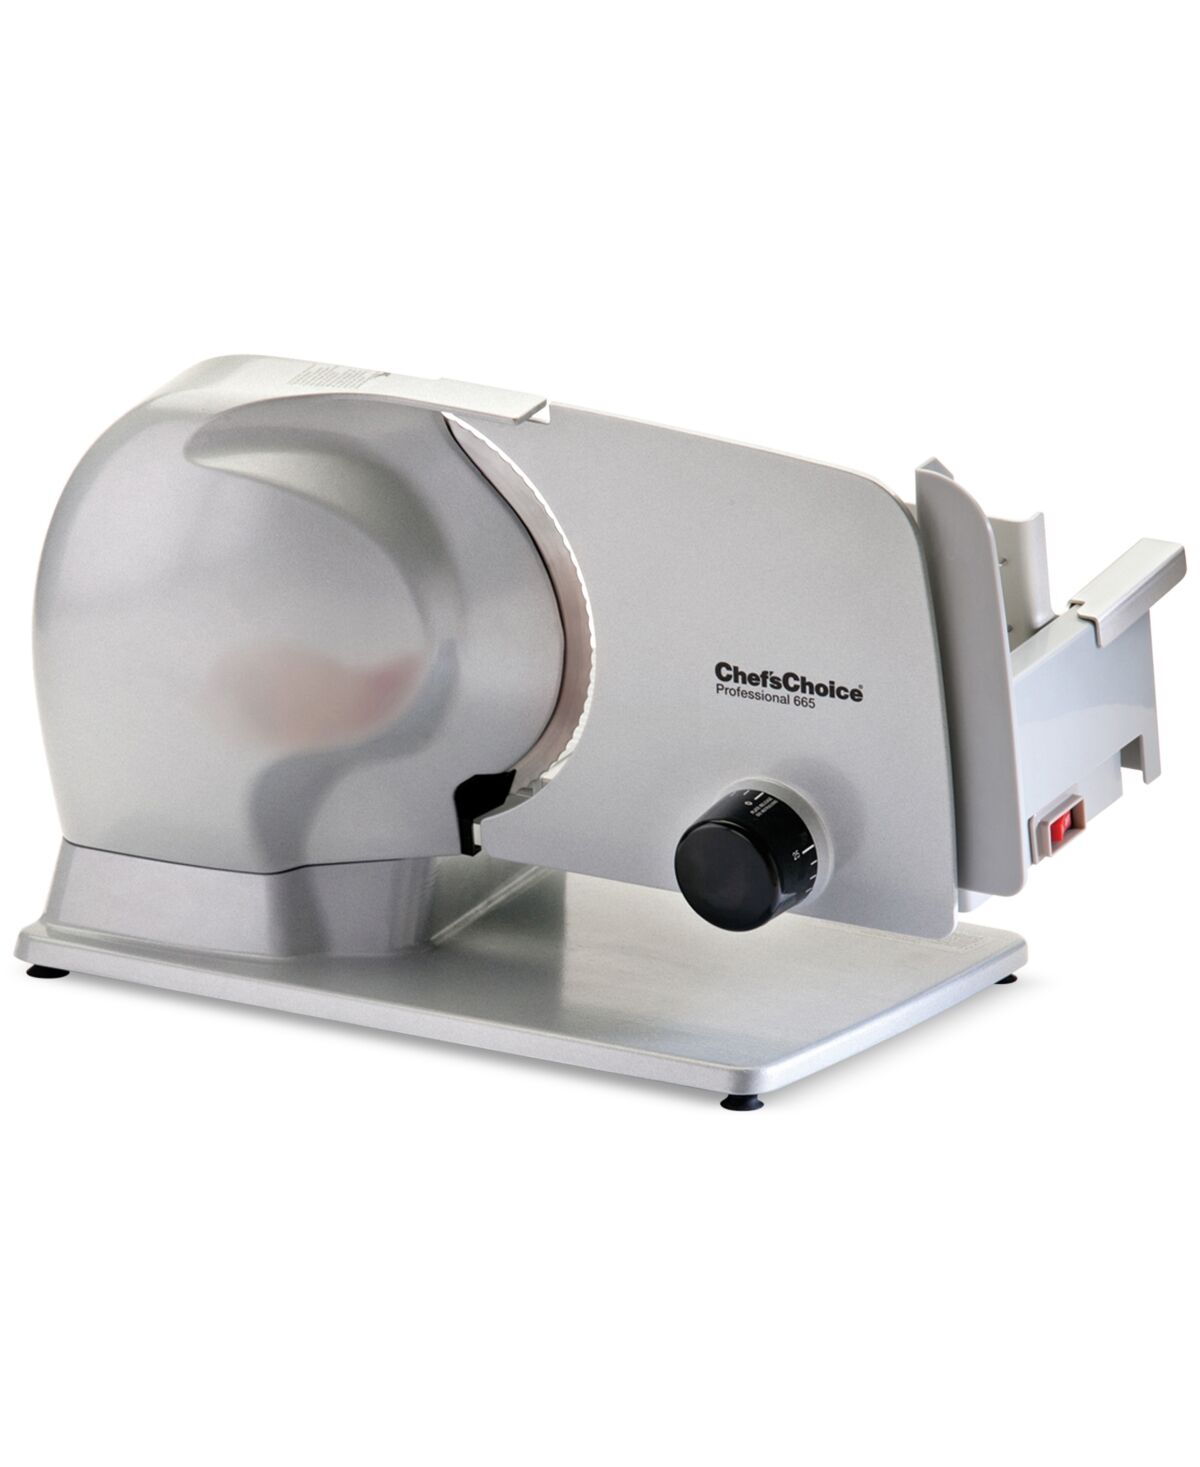 Chef'schoice Edgecraft Chef'sChoice M665 Professional Electric Food Slicer